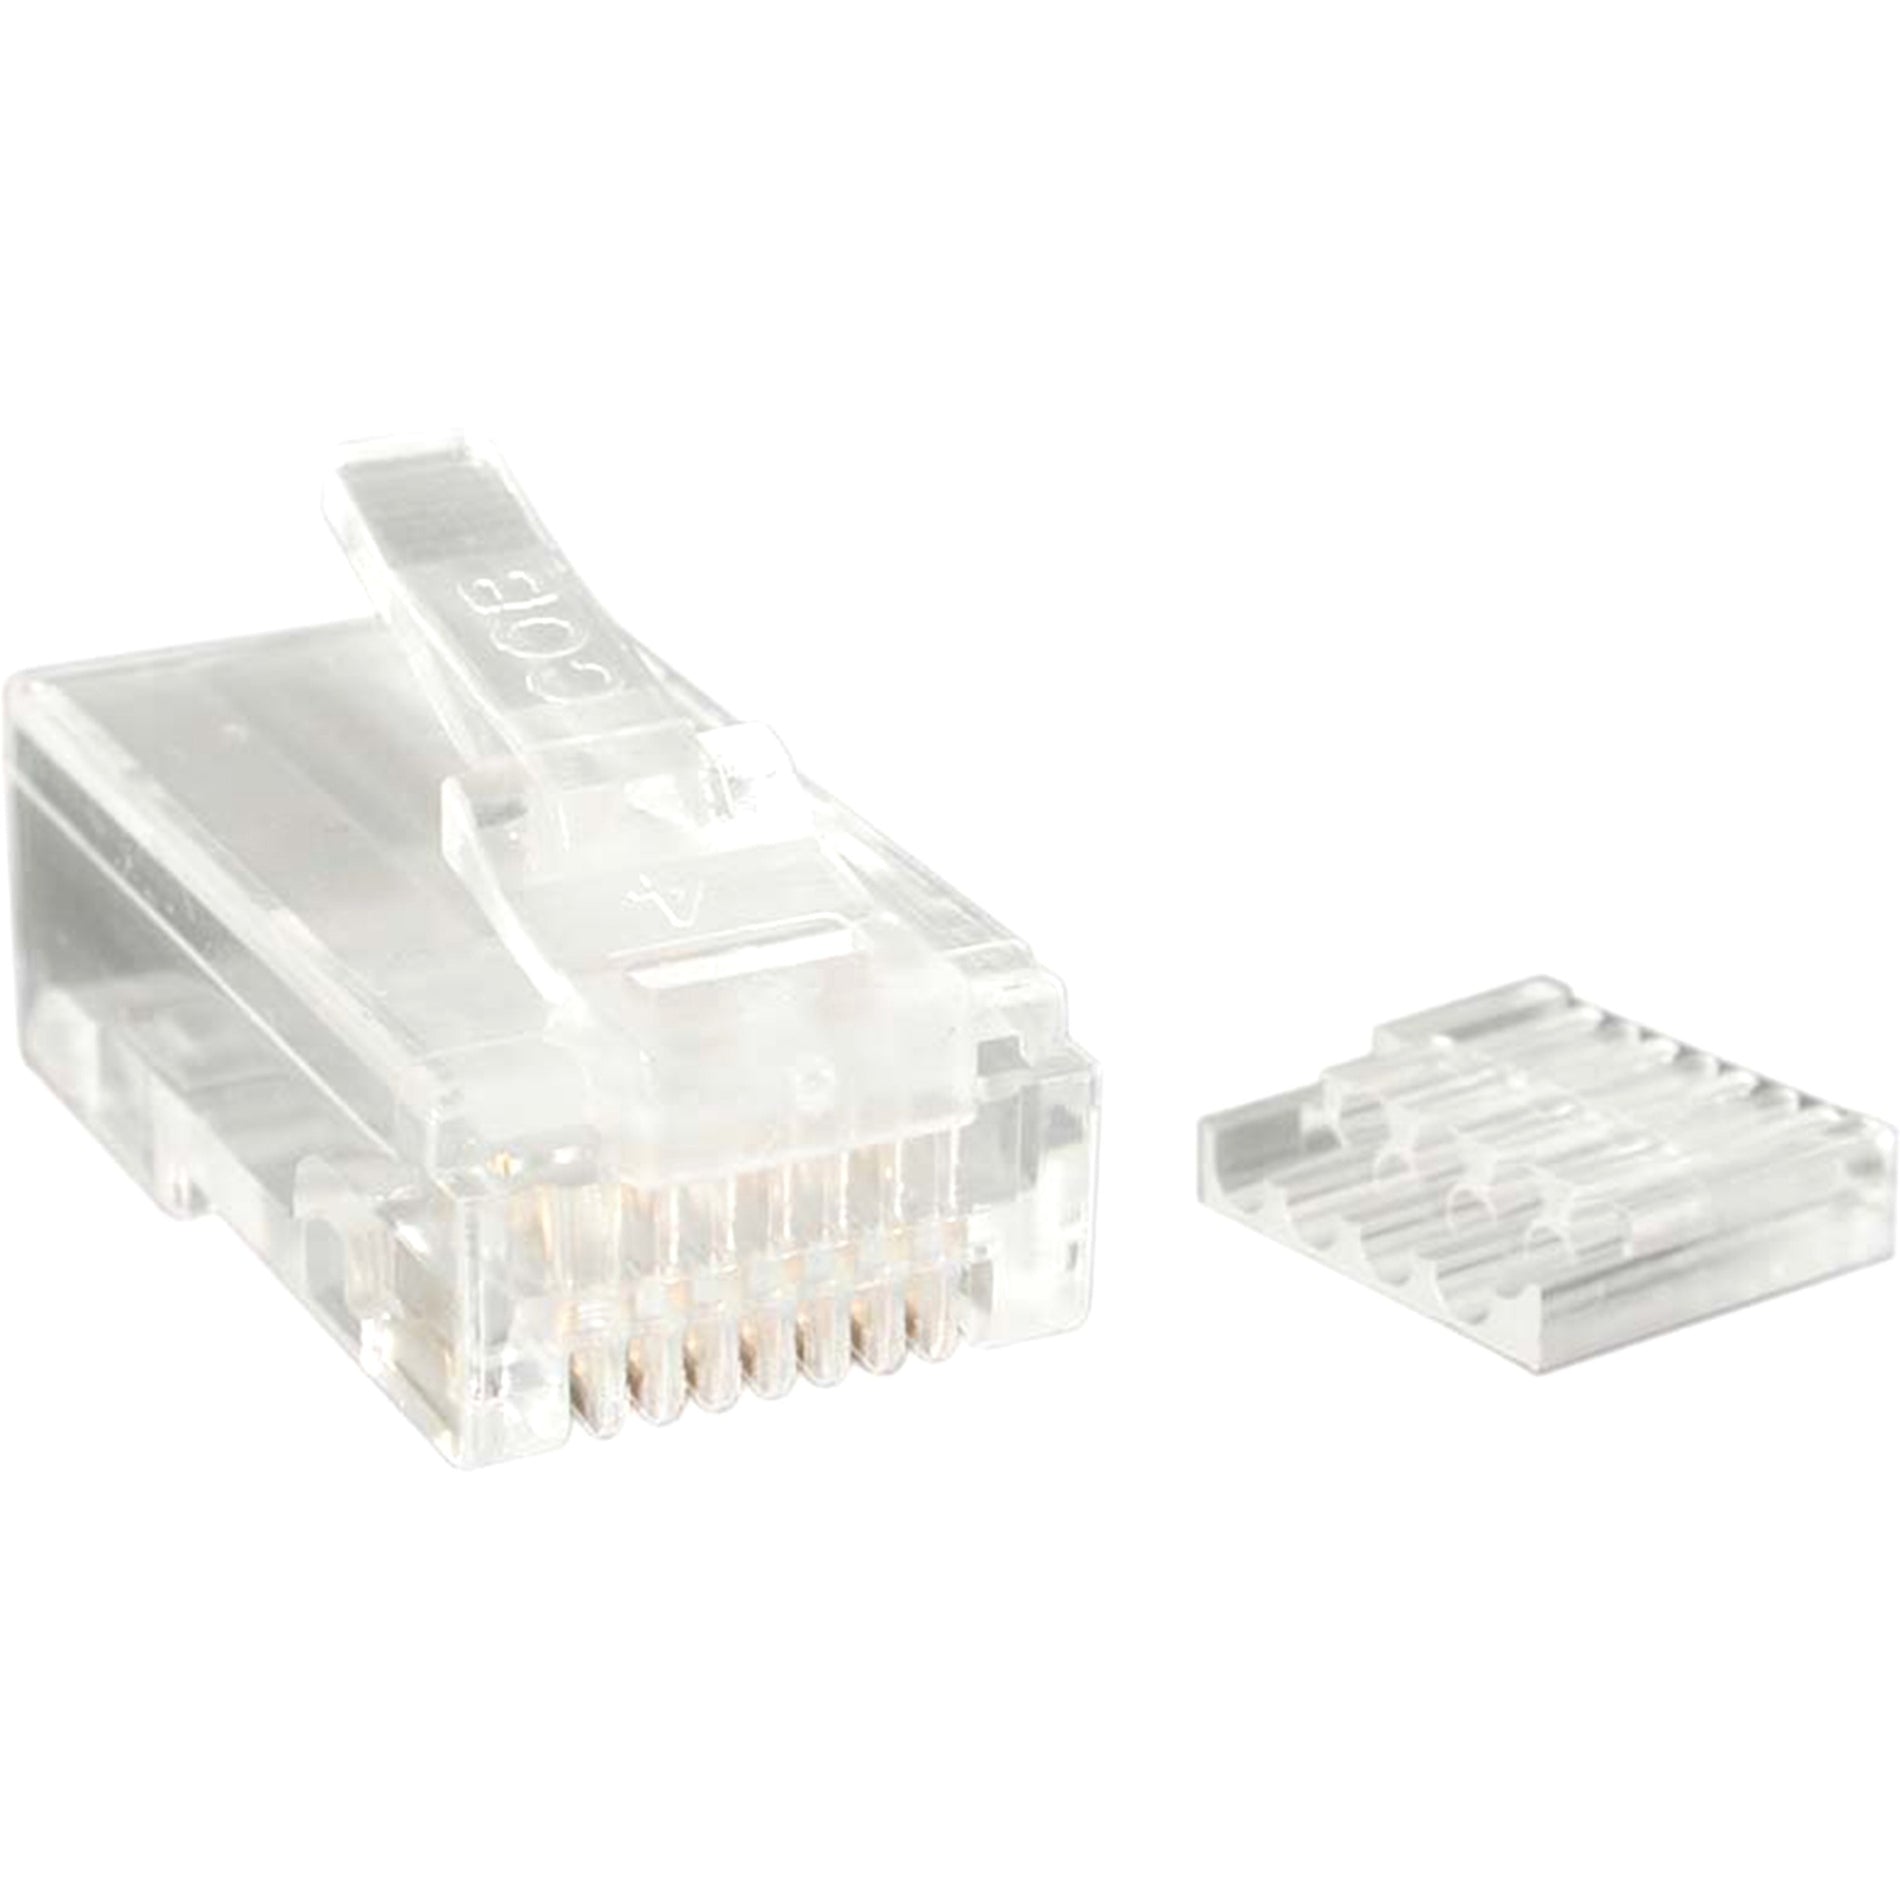 StarTech.com CRJ45C6STR50 Cat.6 RJ45 Stranded Modular Plug Connector 50 Pack, Easy-to-Use Network Connector for Reliable Connections